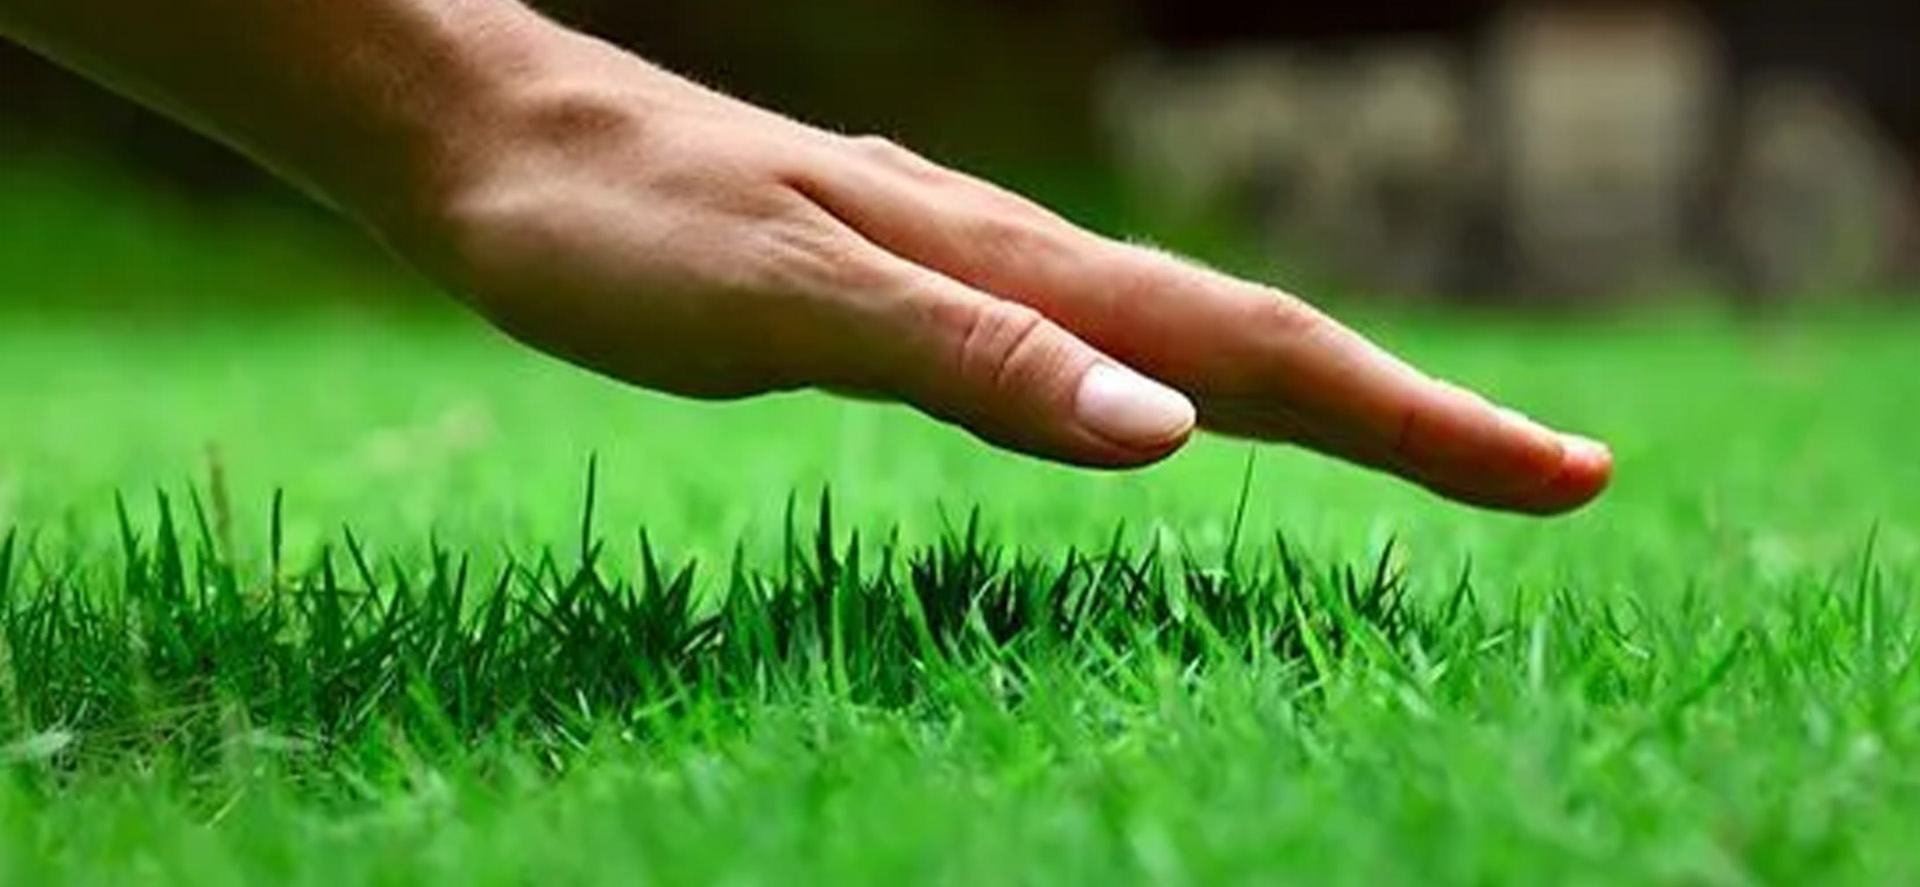 maintaining a healthy lawn